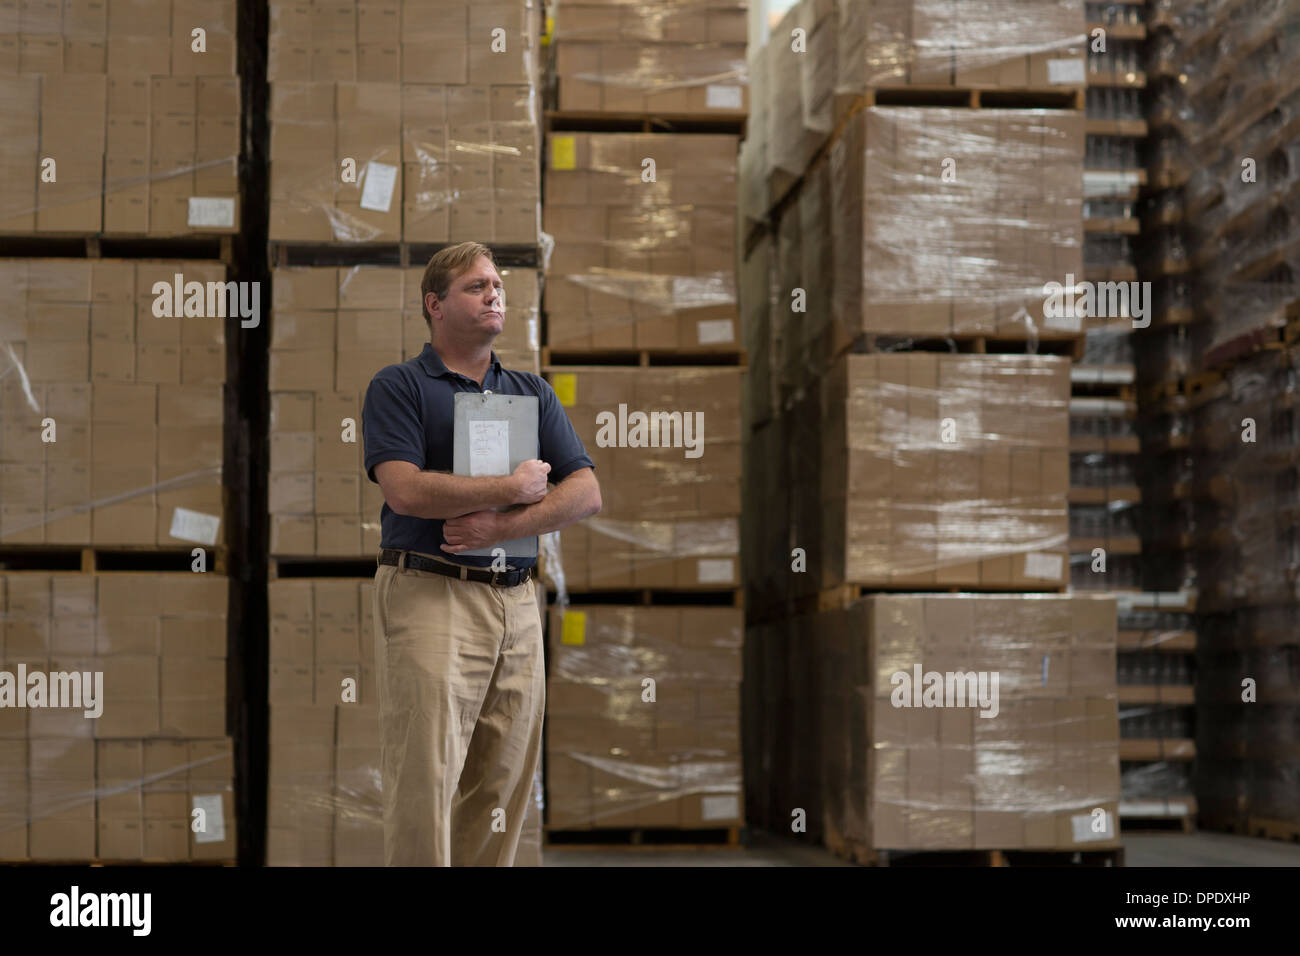 Man holding clipboard in warehouse Stock Photo